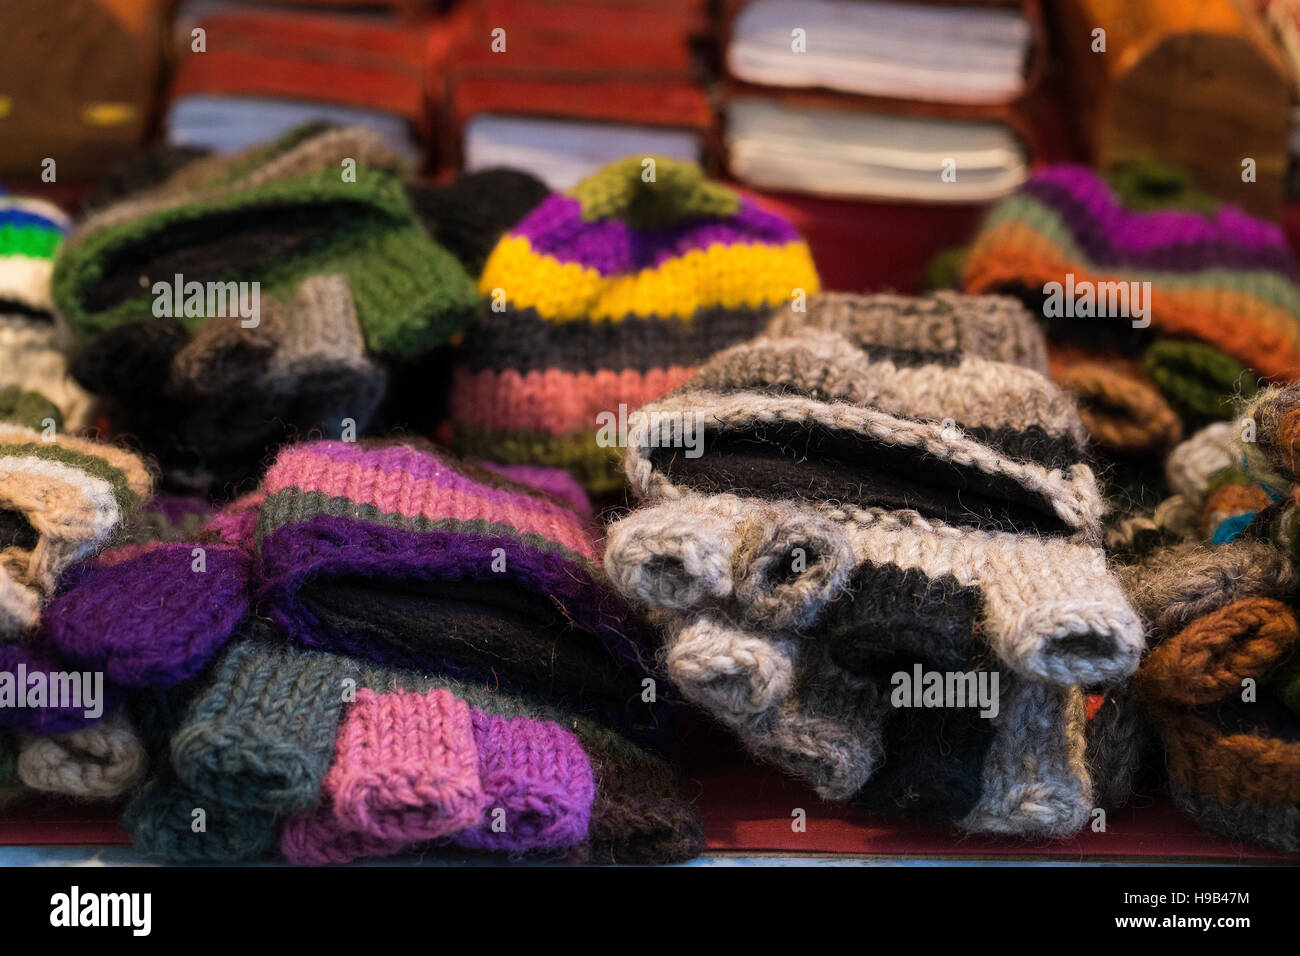 Piles of handmade wool fingerless stripe glove mittens displayed on a stall at a craft artisanal market Stock Photo